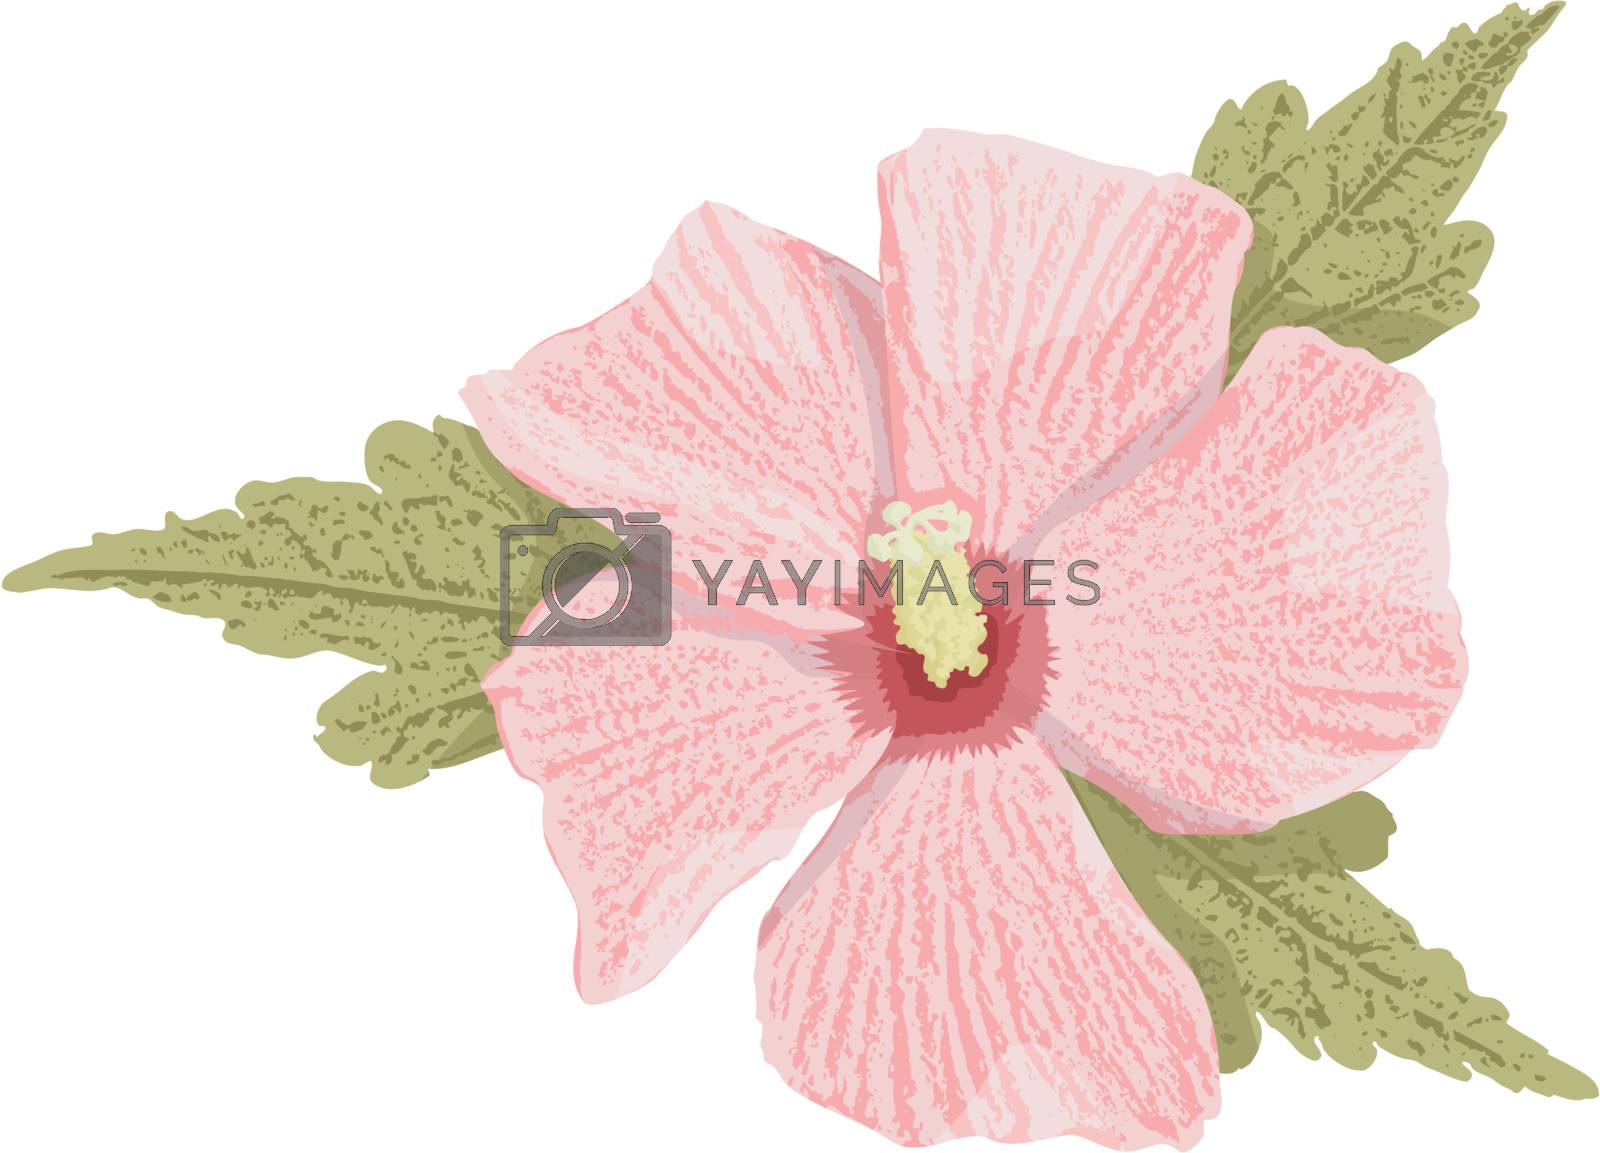 Royalty free image of Pink hibiscus by sifis